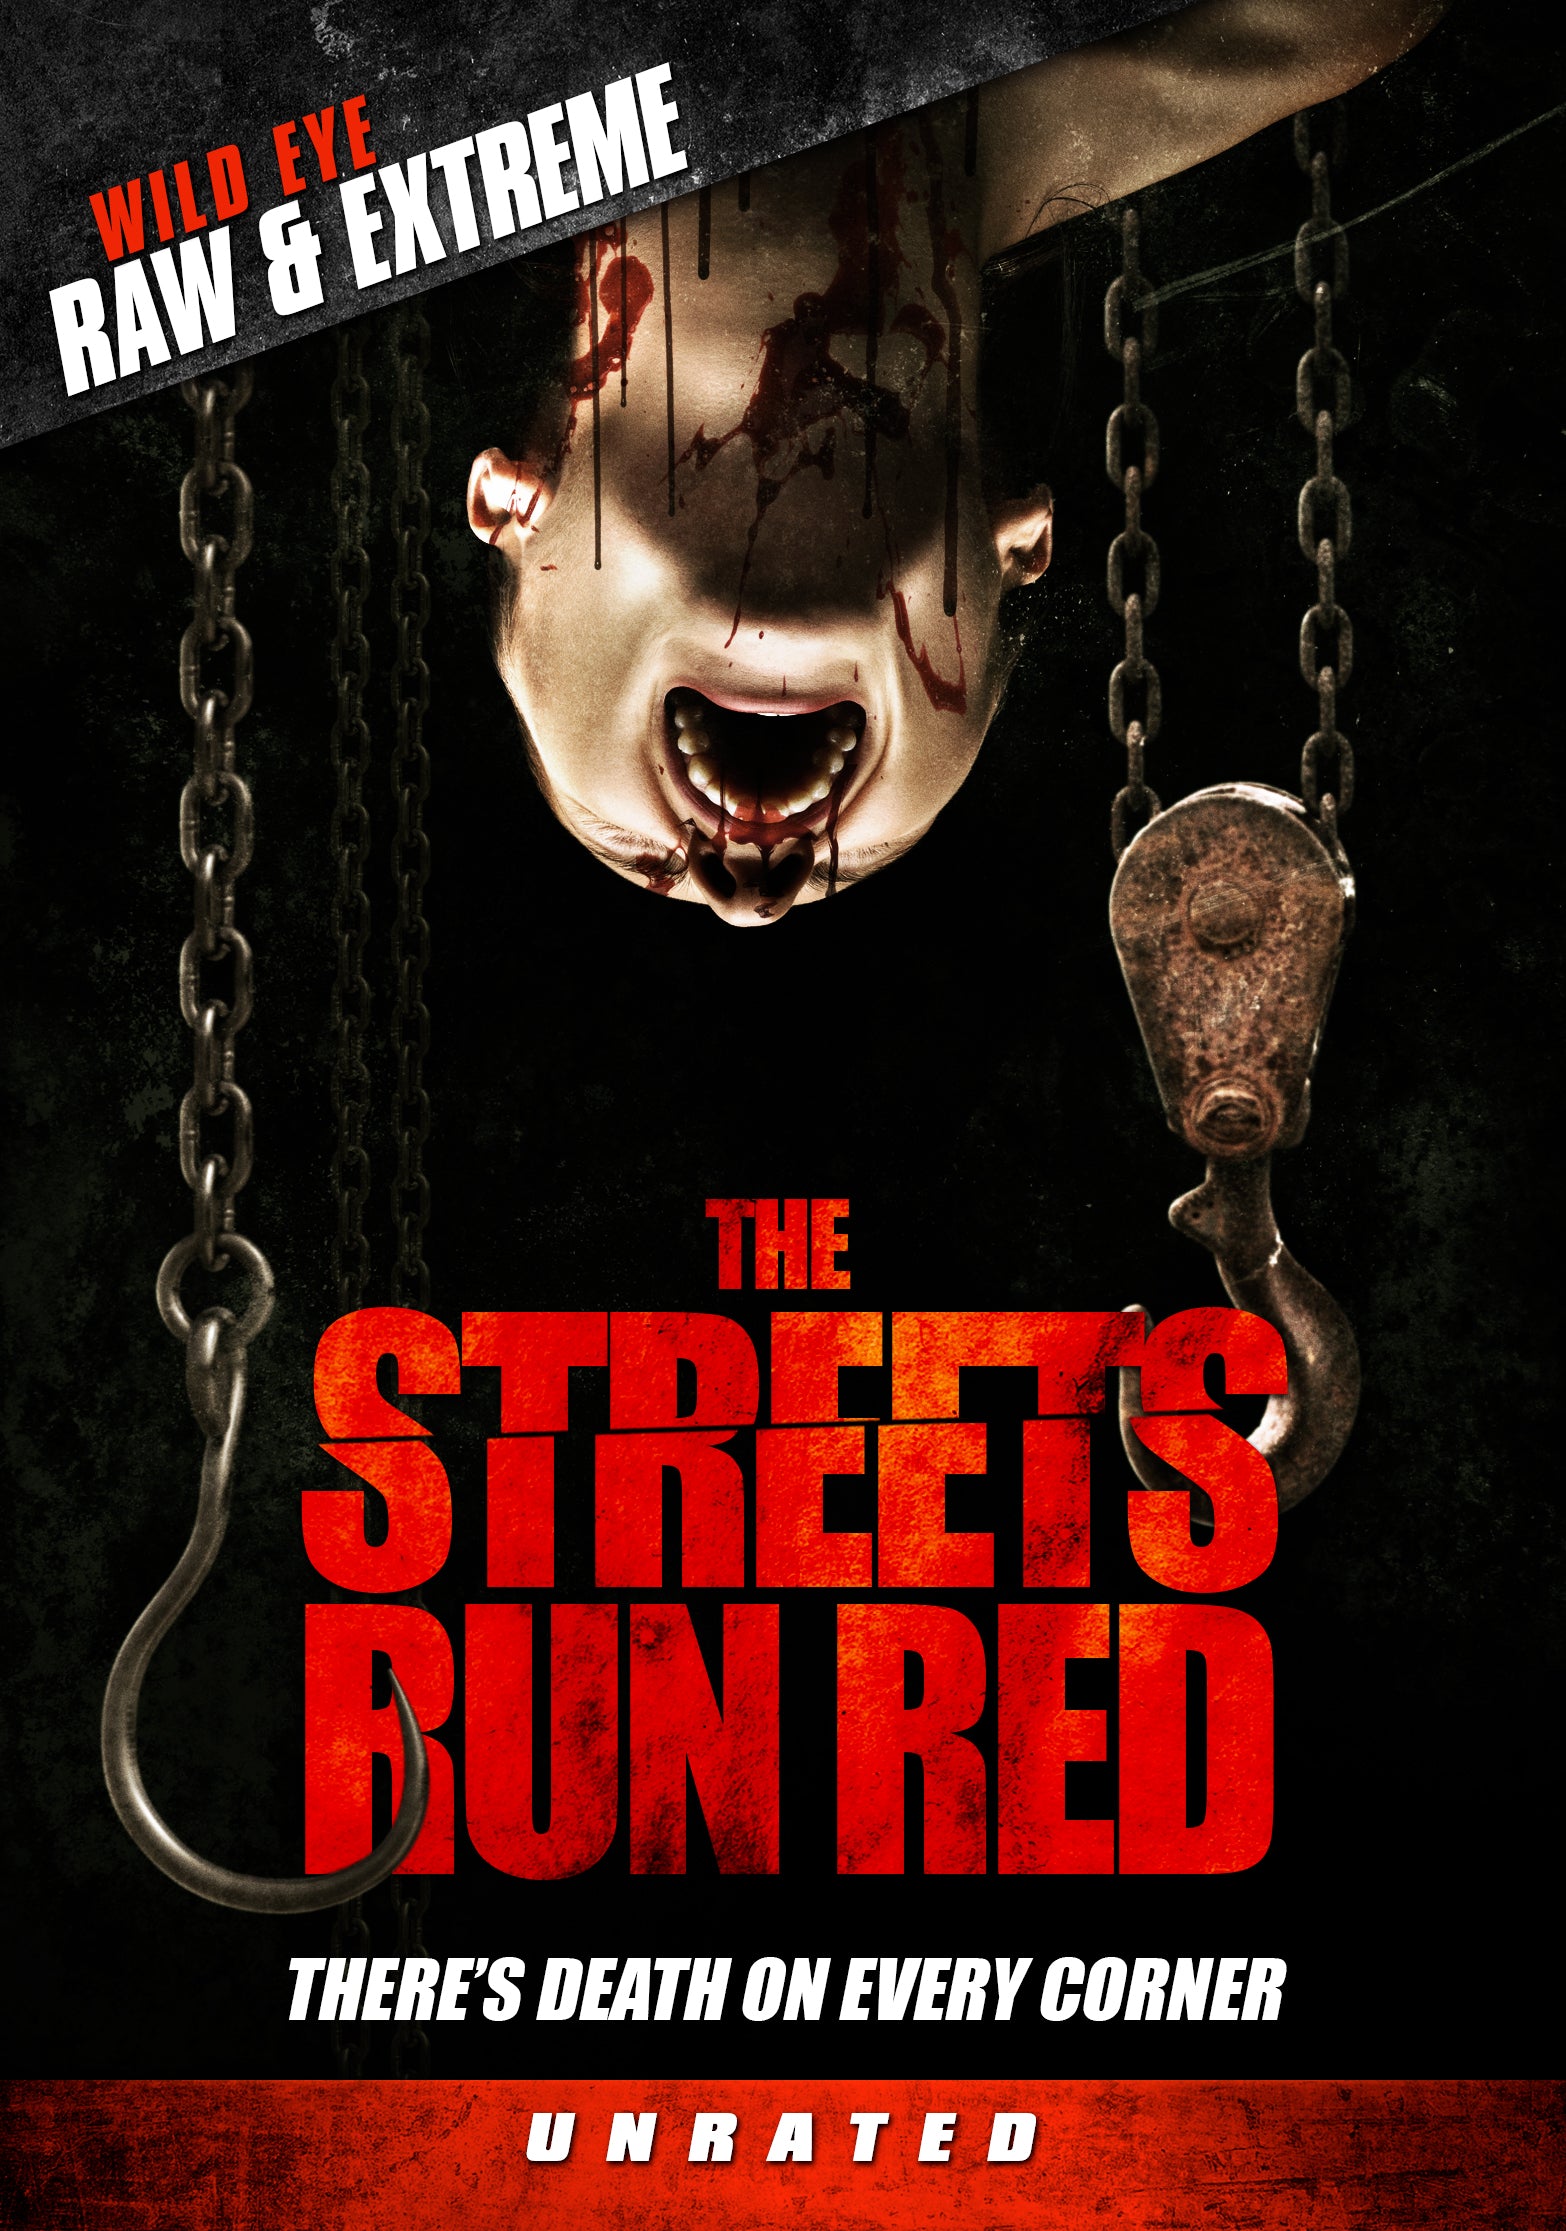 THE STREETS RUN RED DVD